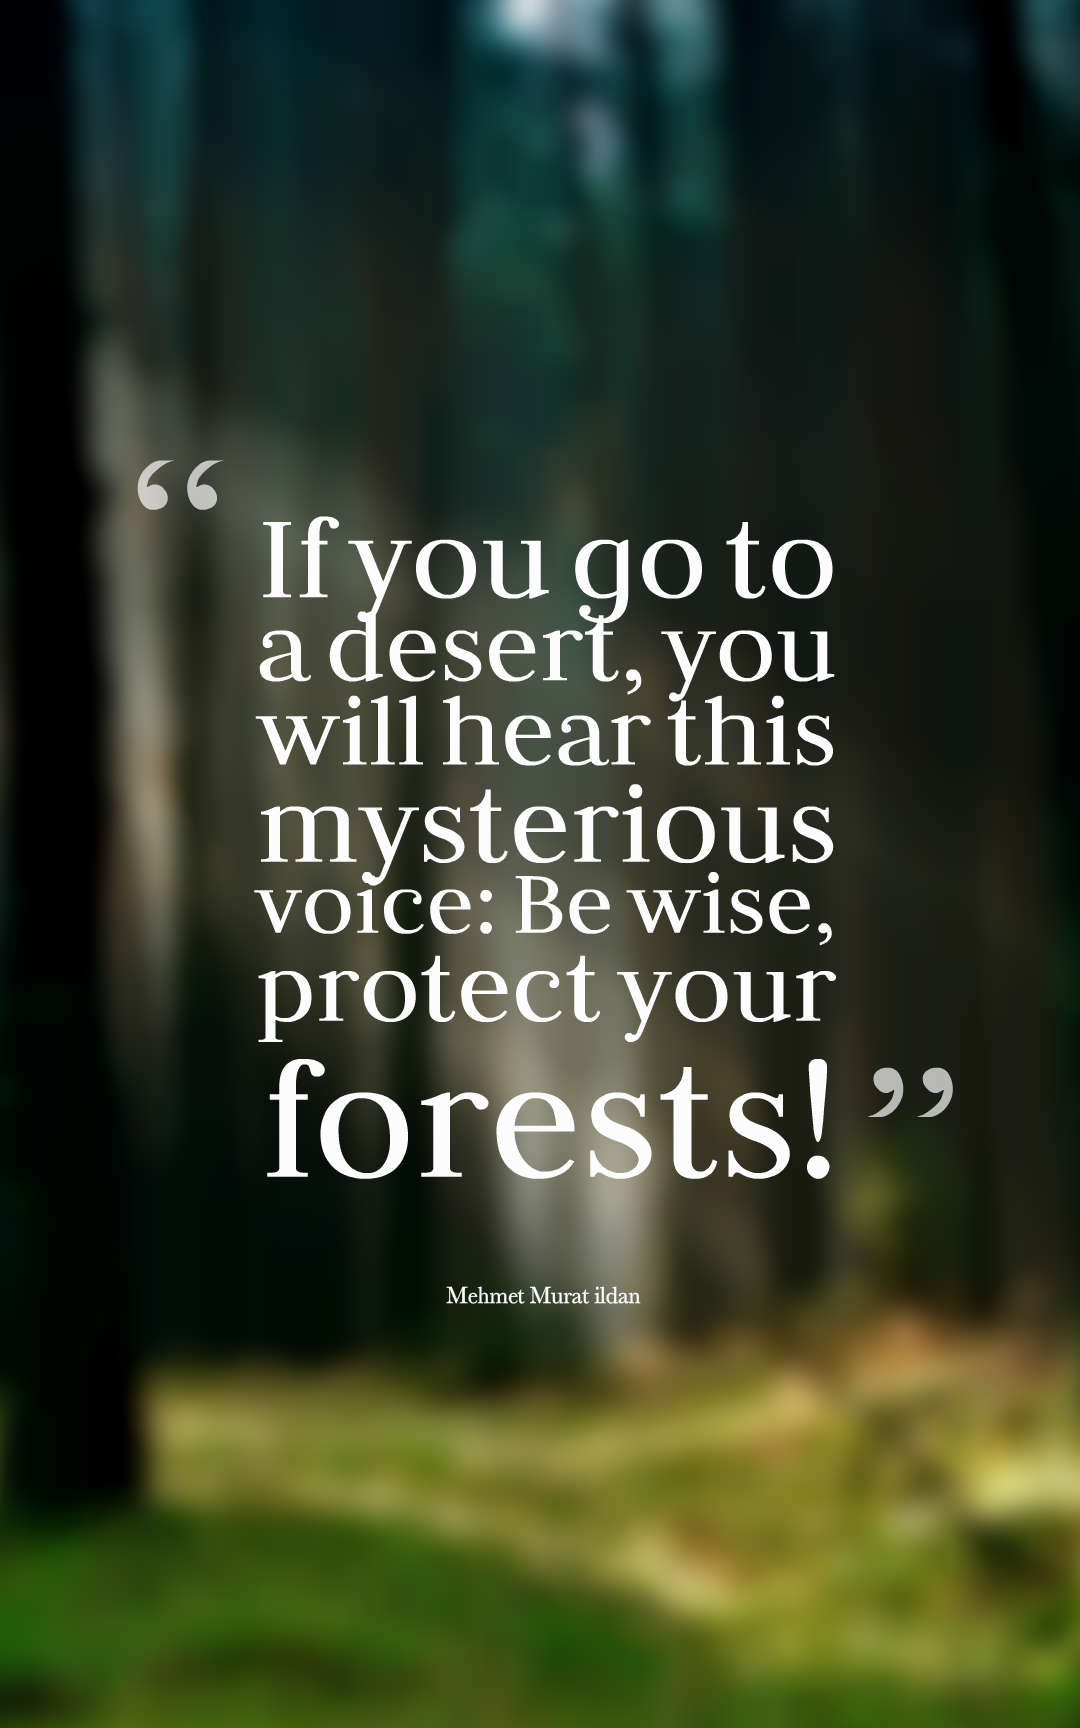 If you go to a desert, you will hear this mysterious voice Be wise, protect your forests!